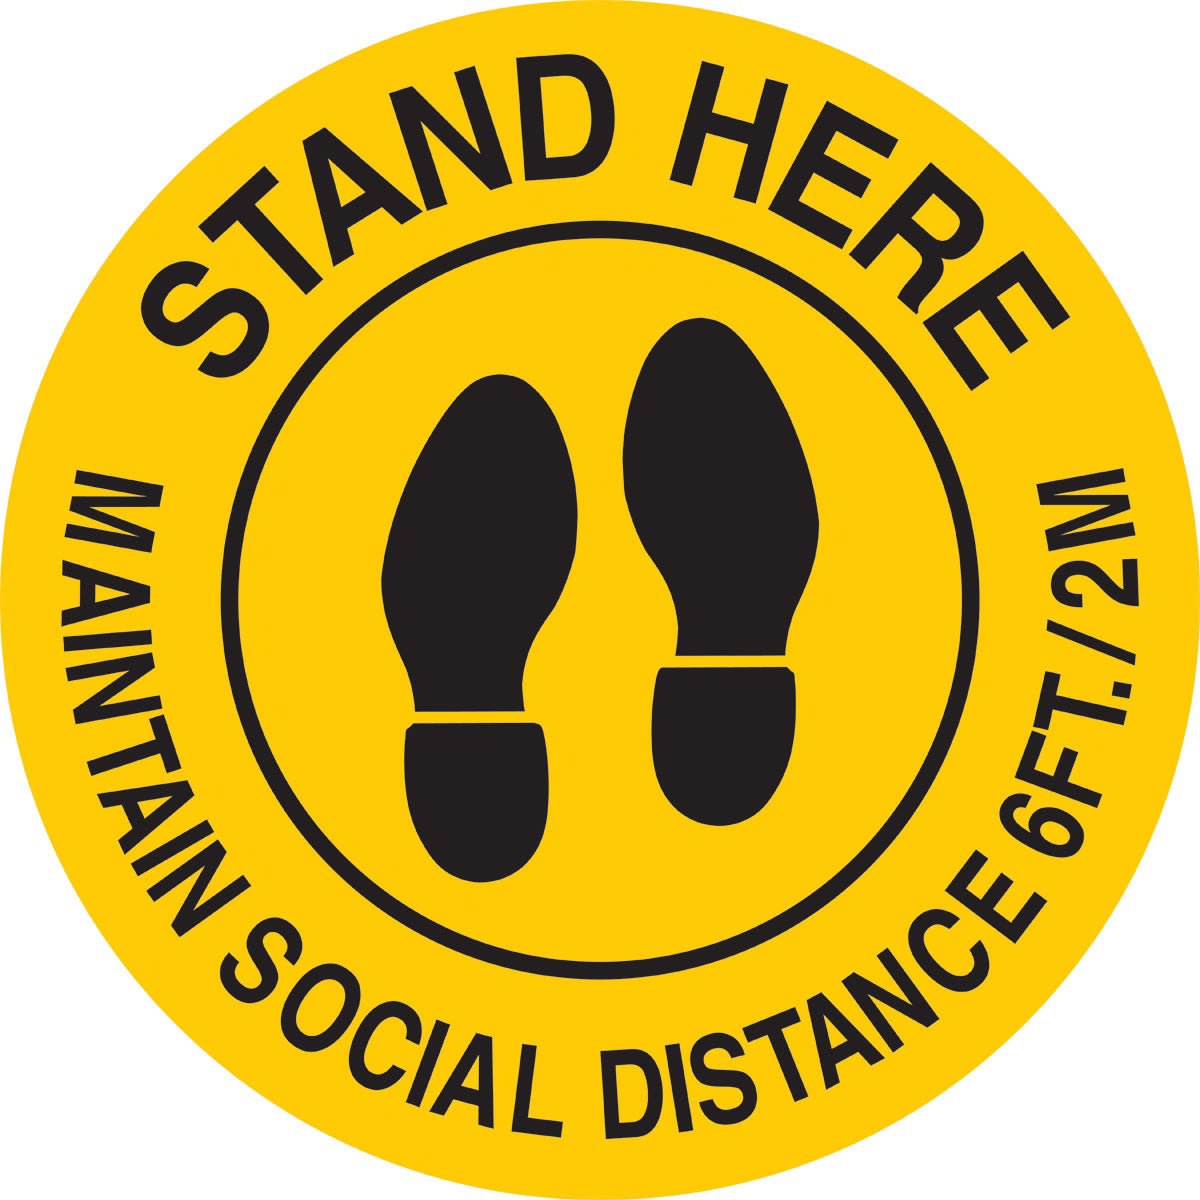 STAND HERE - Maintain Social Distance 6 FT - CYANvisuals